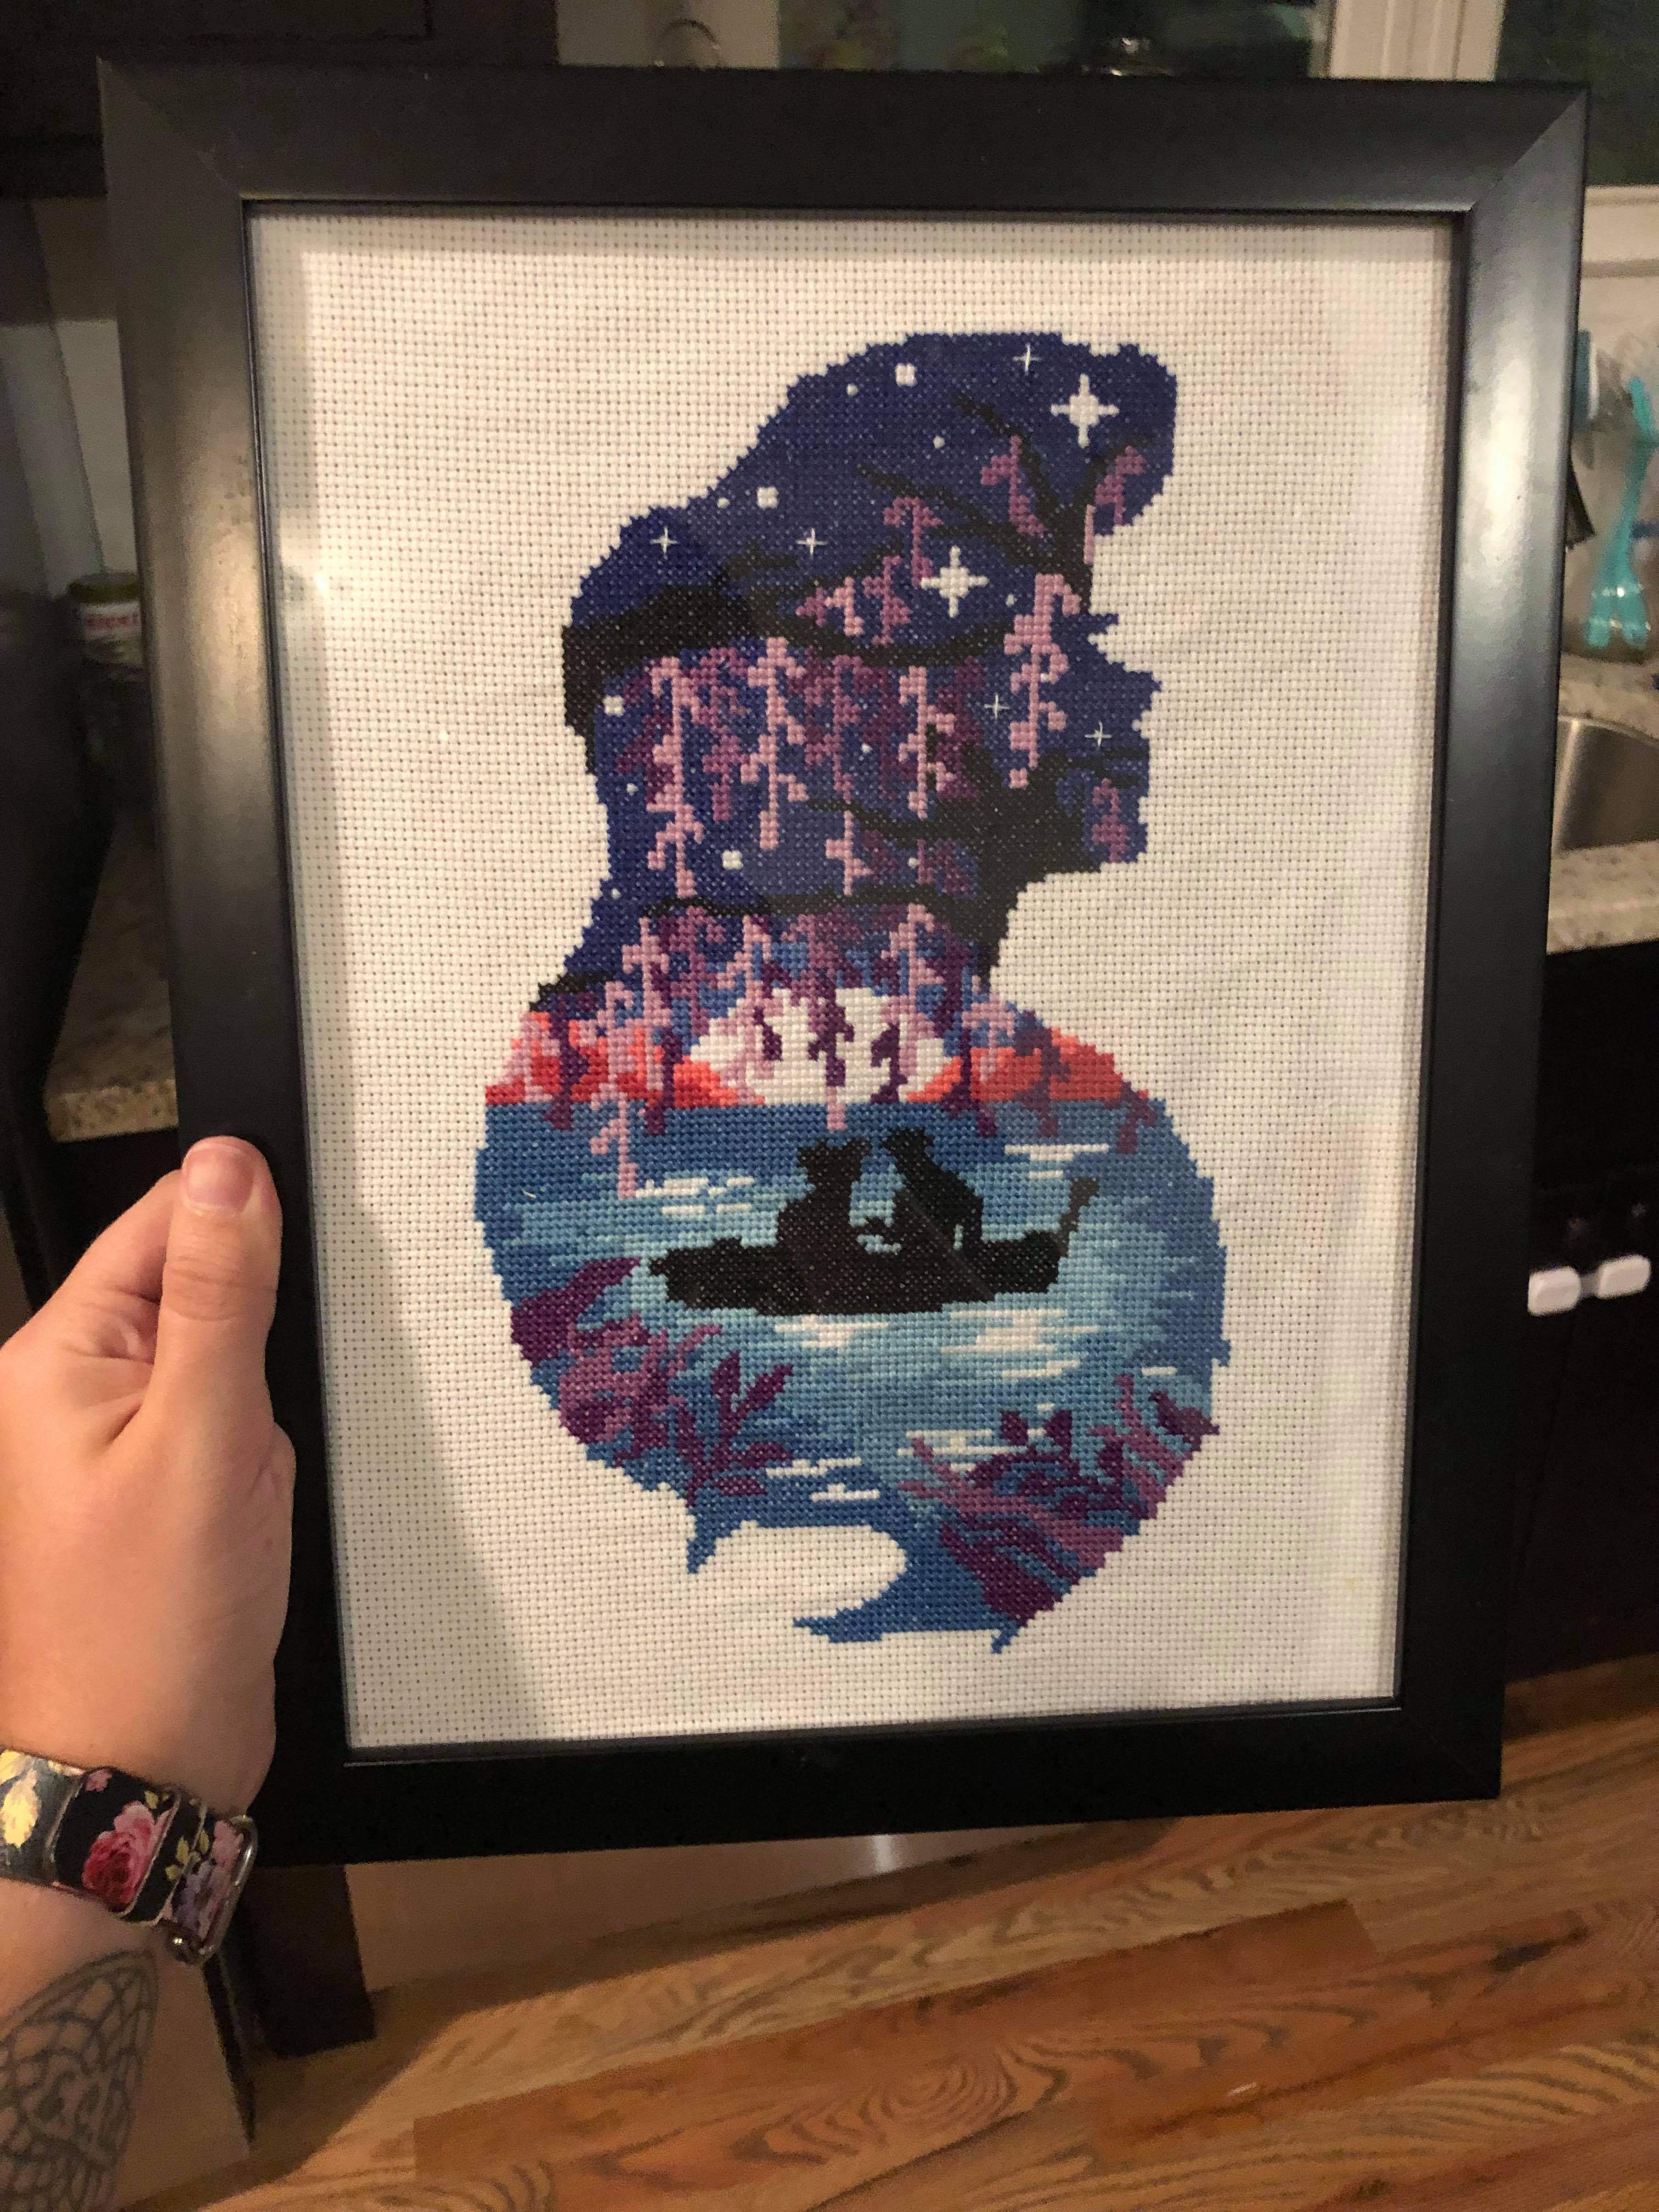 A cross stitch in the shape of ariel's head with the kiss the girl scene filling it out